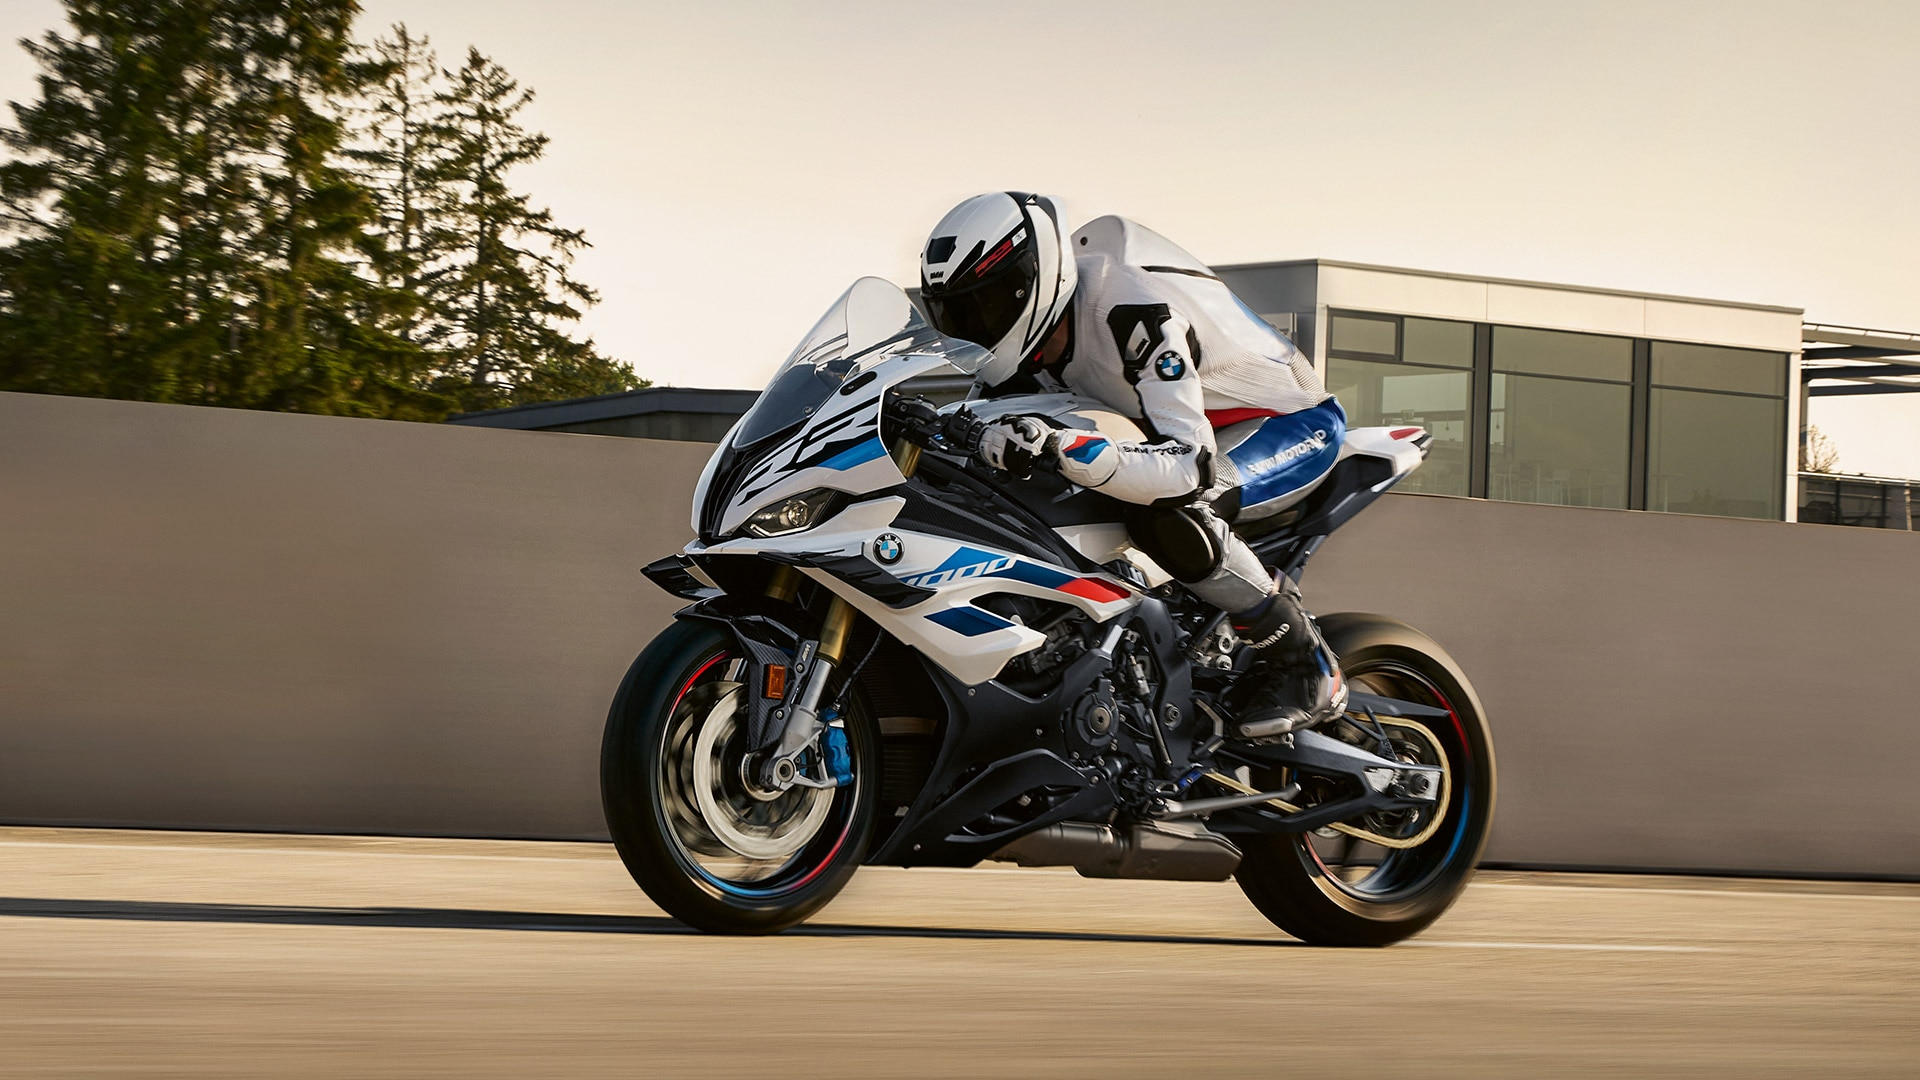 BMW S1000RR at a race track 